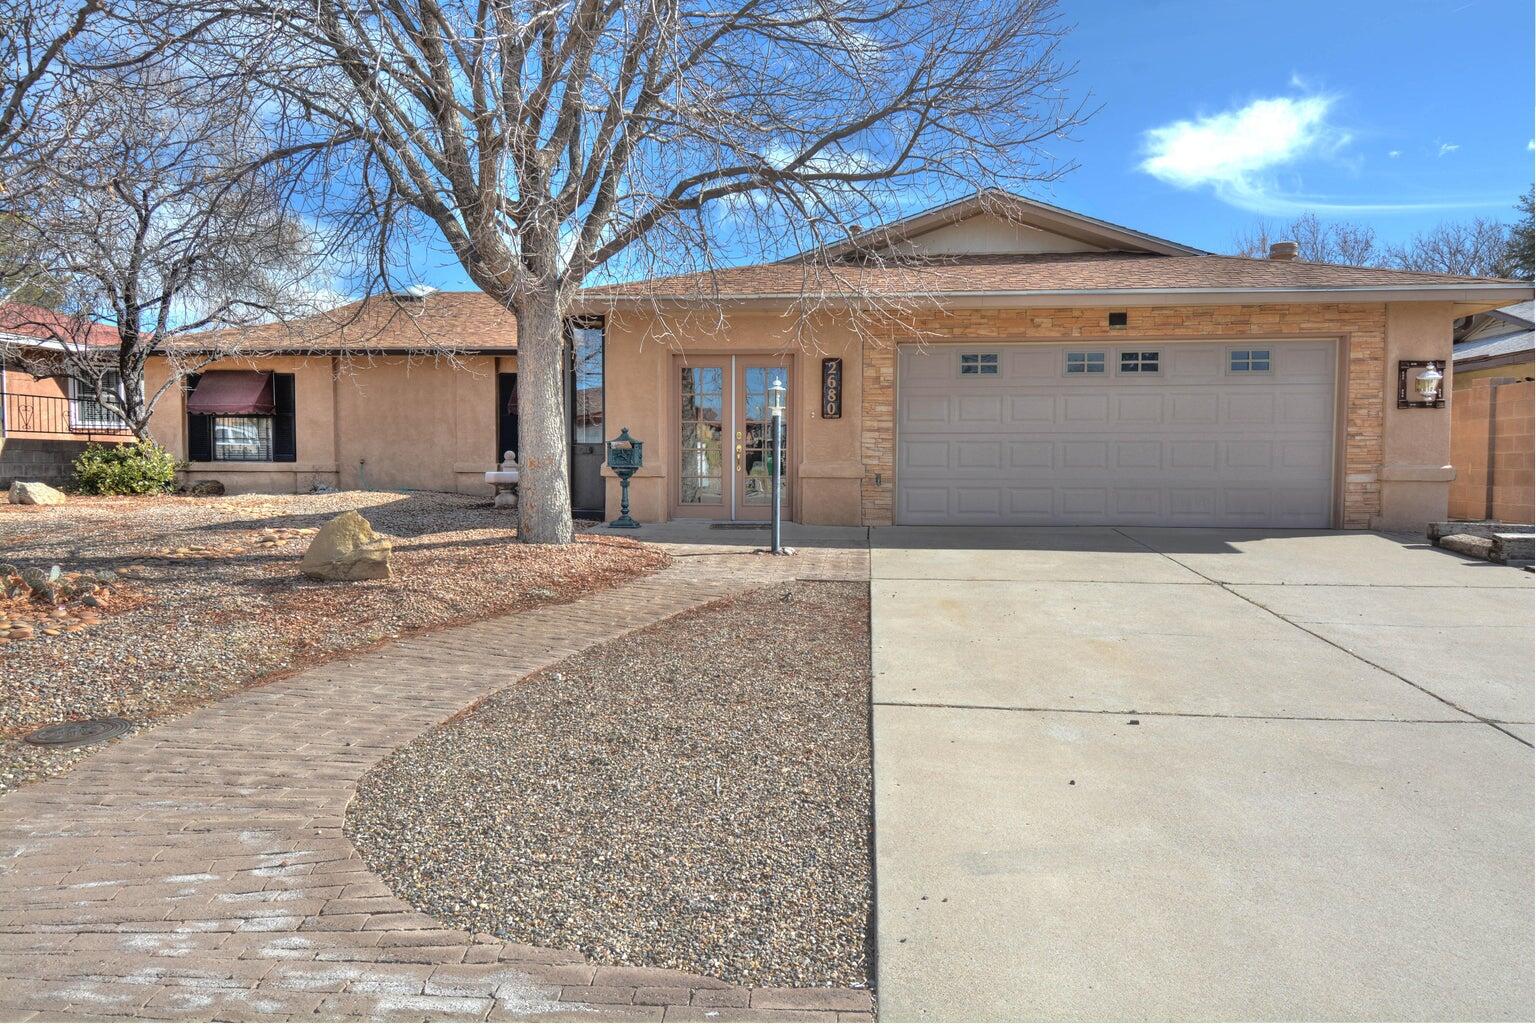 &#127968;&#10024; Just Listed in Rio Rancho! &#10024;&#127968;Welcome to your dream home! This gorgeous 3 bed, 2 1/2 bath sanctuary is now on the market and ready to impress! Located in a prime spot in Rio Rancho, this gem features:&#128719;&#65039; 3 cozy bedrooms for ultimate comfort&#128705; 2 1/2  bathrooms &#127912; Freshly painted interior kitchen &#128273; New carpets throughout, adding warmth and style&#127946;&#8205;&#9794;&#65039; Inviting pool to cool off on those hot summer days&#127744; Relaxing hot tub to unwind after a long dayDon't miss out on this opportunity to own your own slice of paradise! Contact us today for more details and to schedule a viewing. This one won't last long!